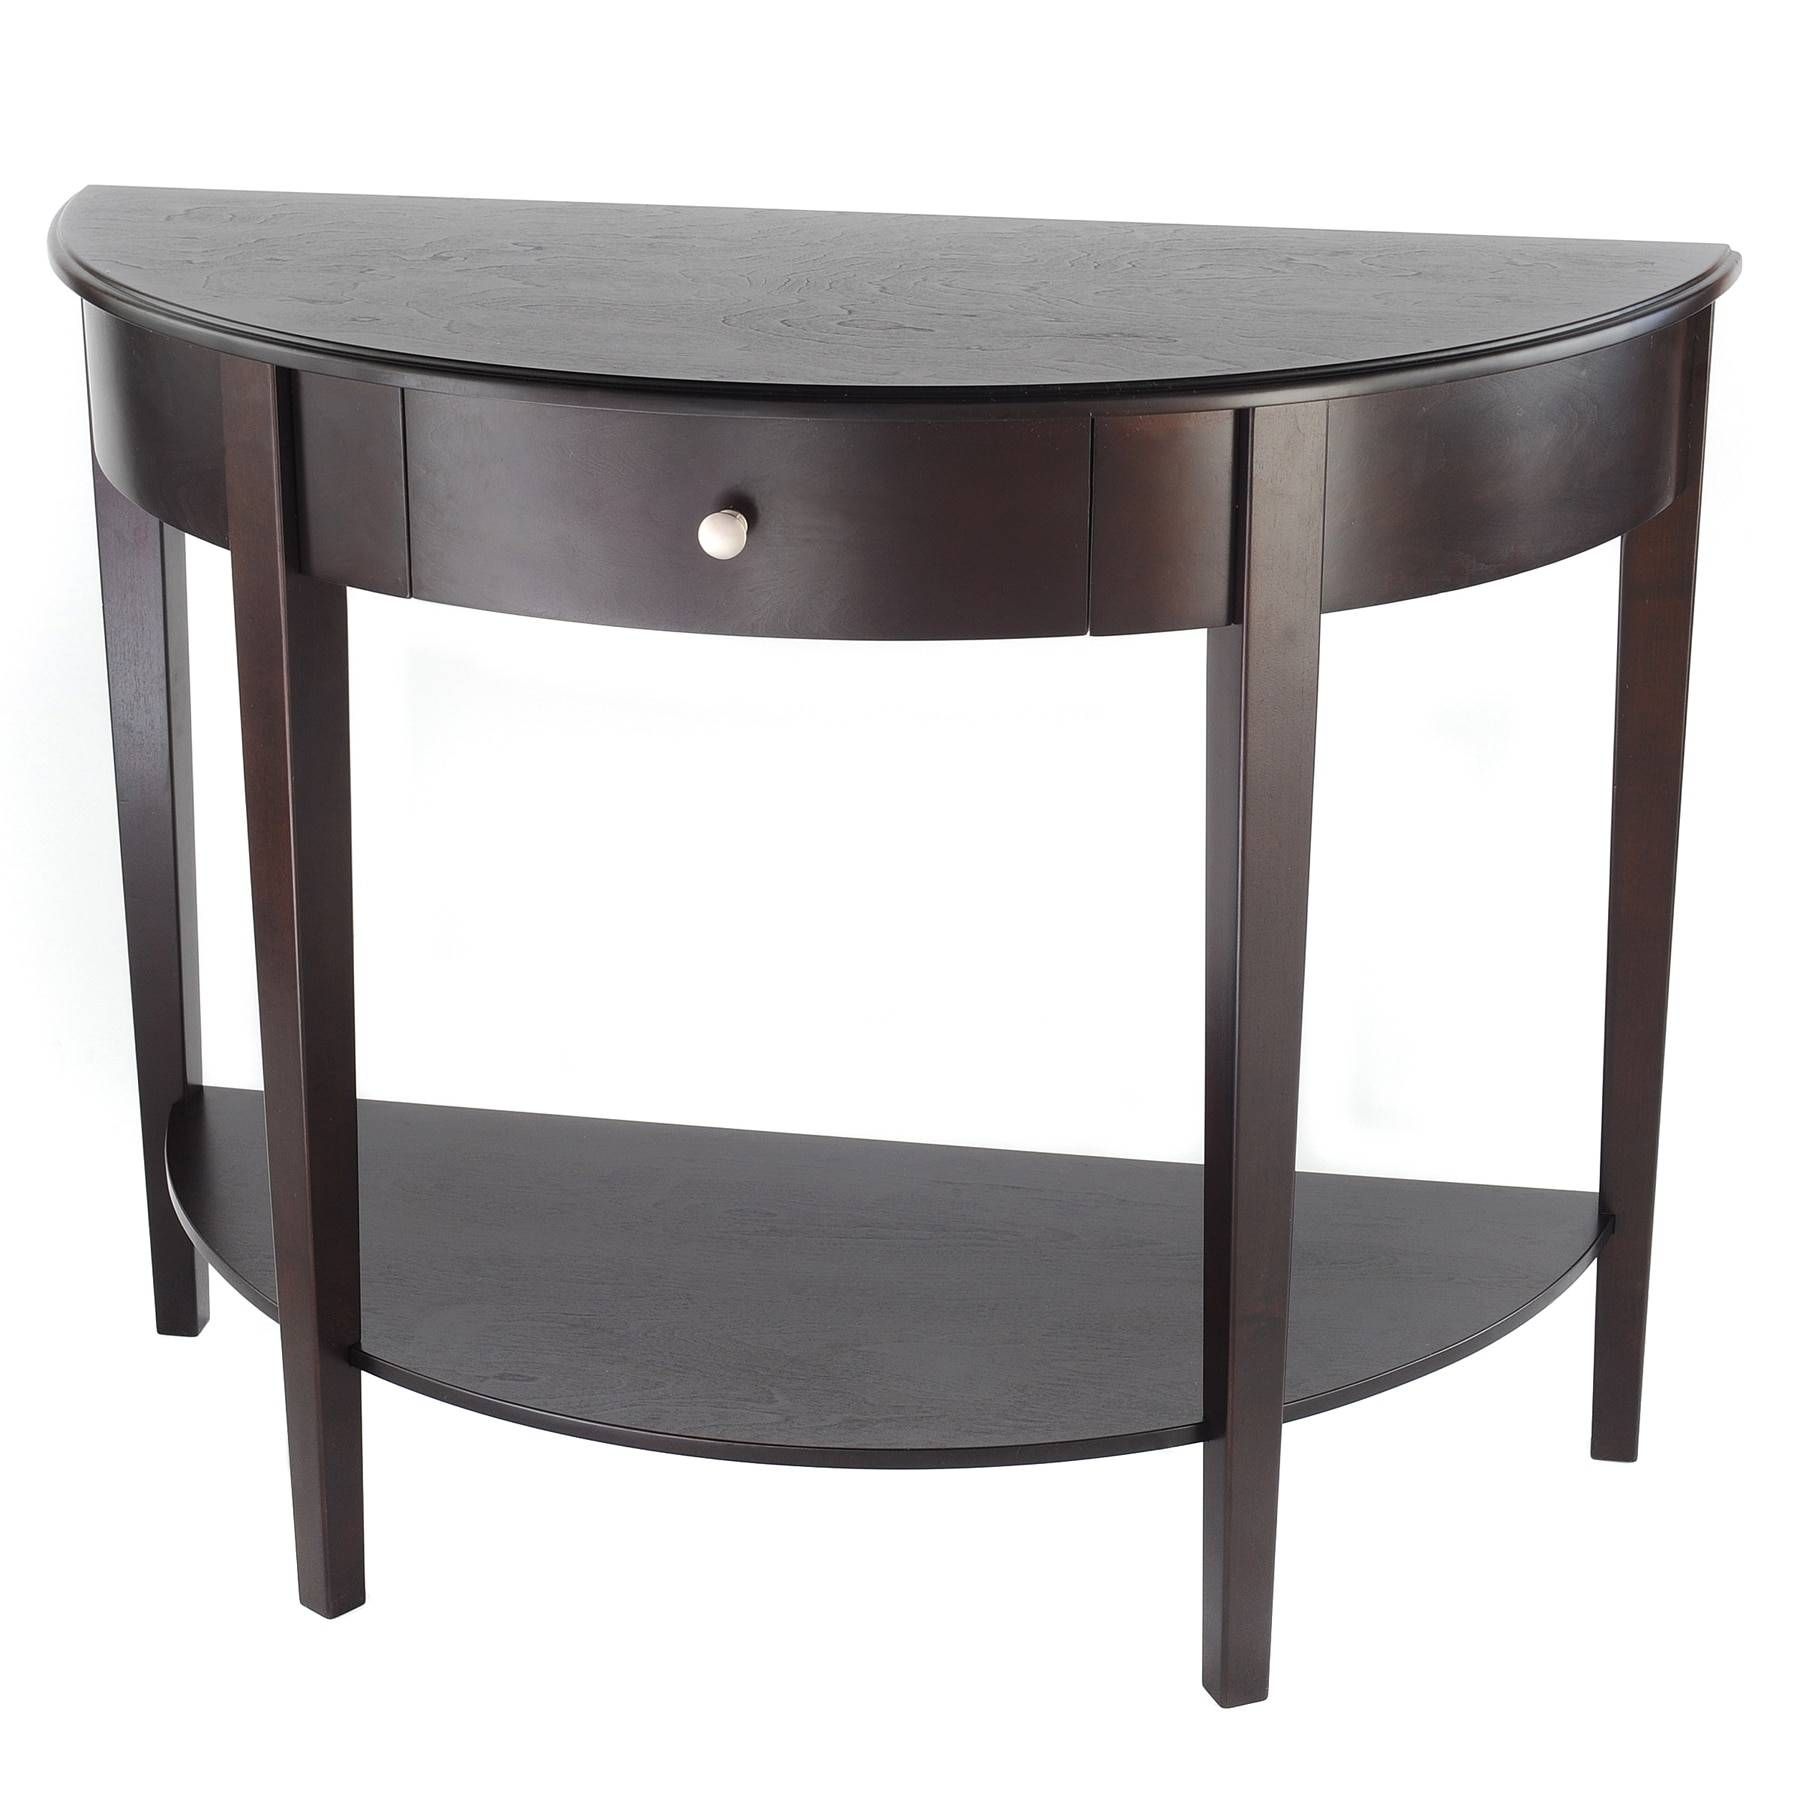 Great Half Circle Accent Table With Living Room Awesome Half Moon Regarding Half Circle Coffee Tables (View 1 of 30)